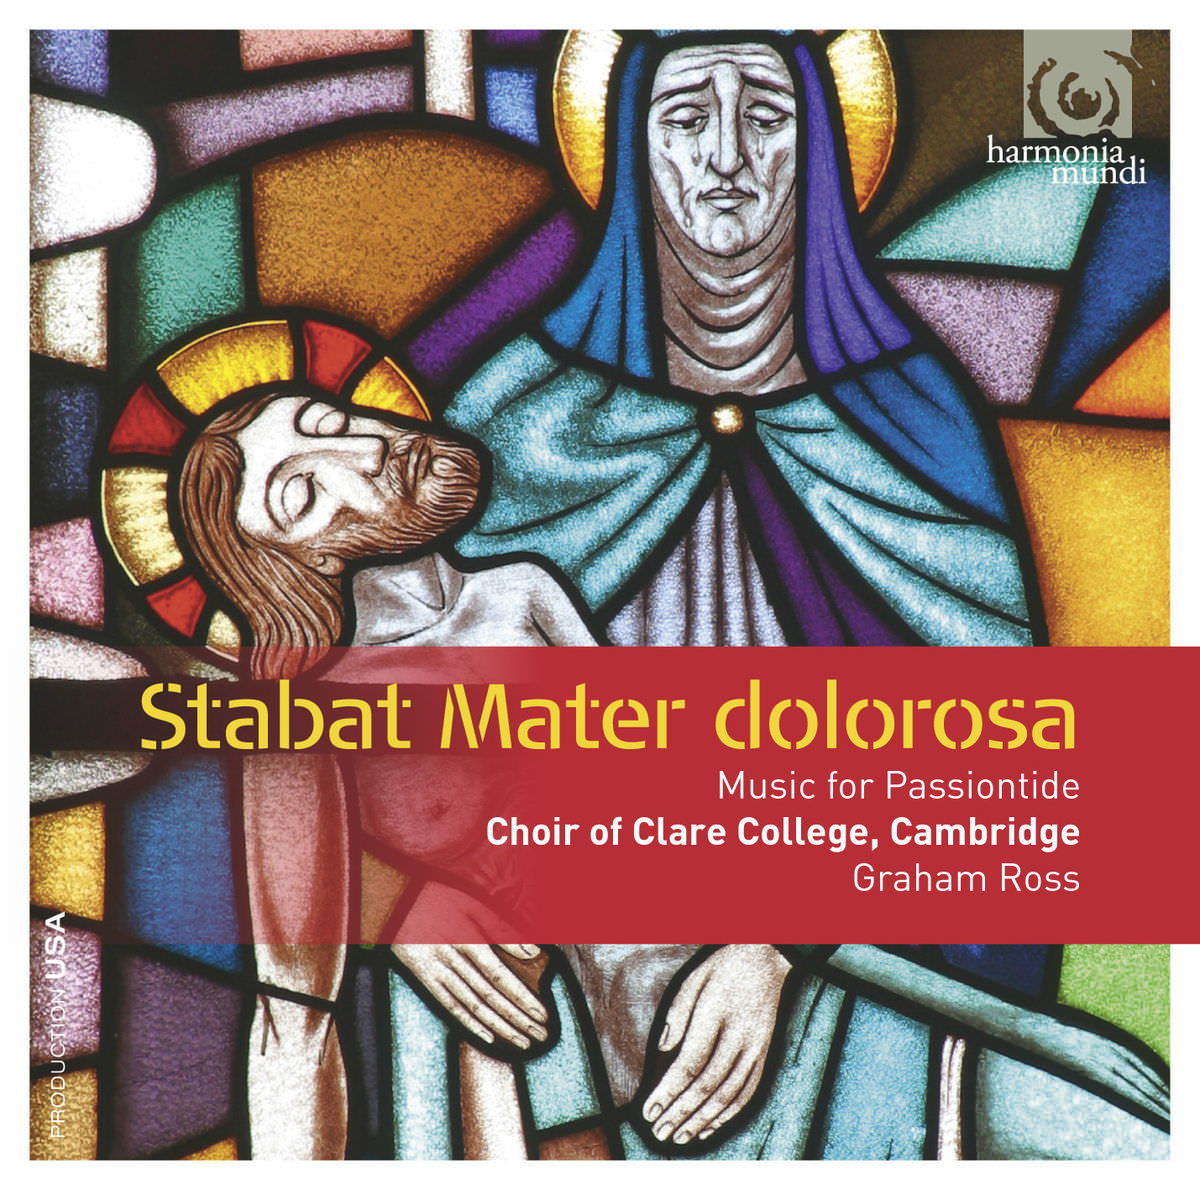 Choir of Clare College, Cambridge and Graham Ross - Stabat Mater dolorosa: Music for Passiontide (2014) [Qobuz FLAC 24bit/96kHz]